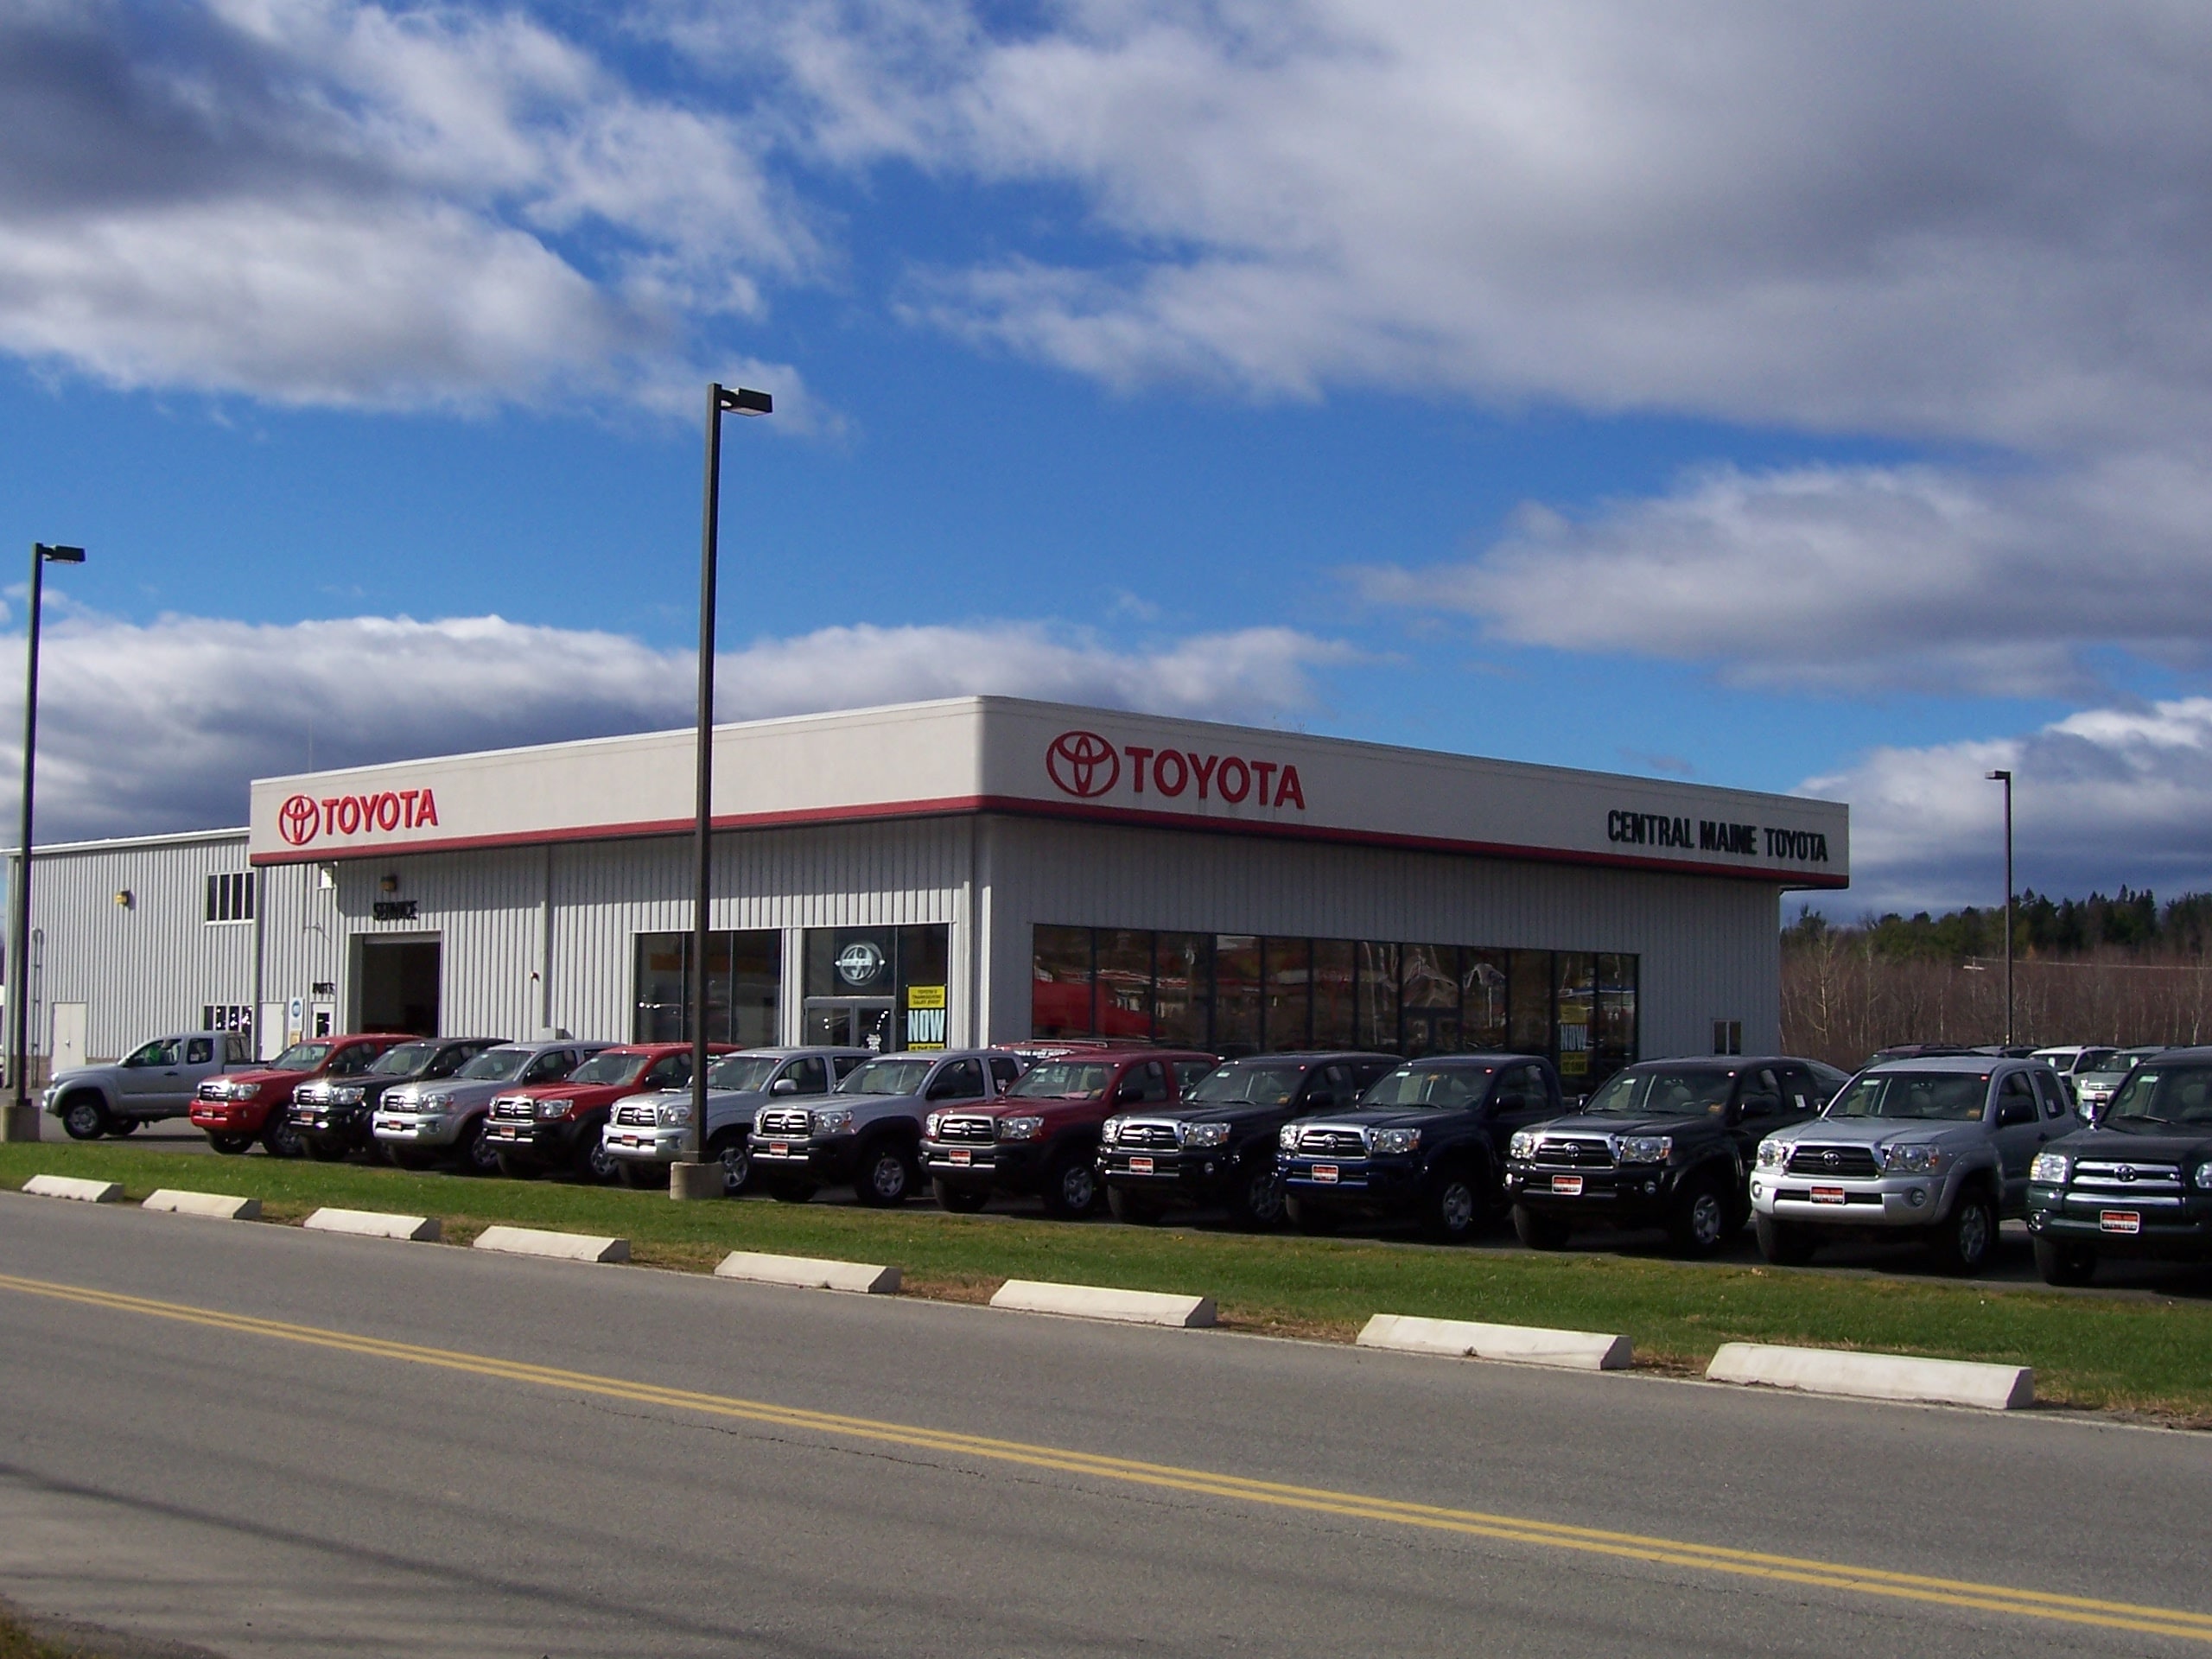 About Central Maine Toyota | Auto Sales, Service & Parts in ME